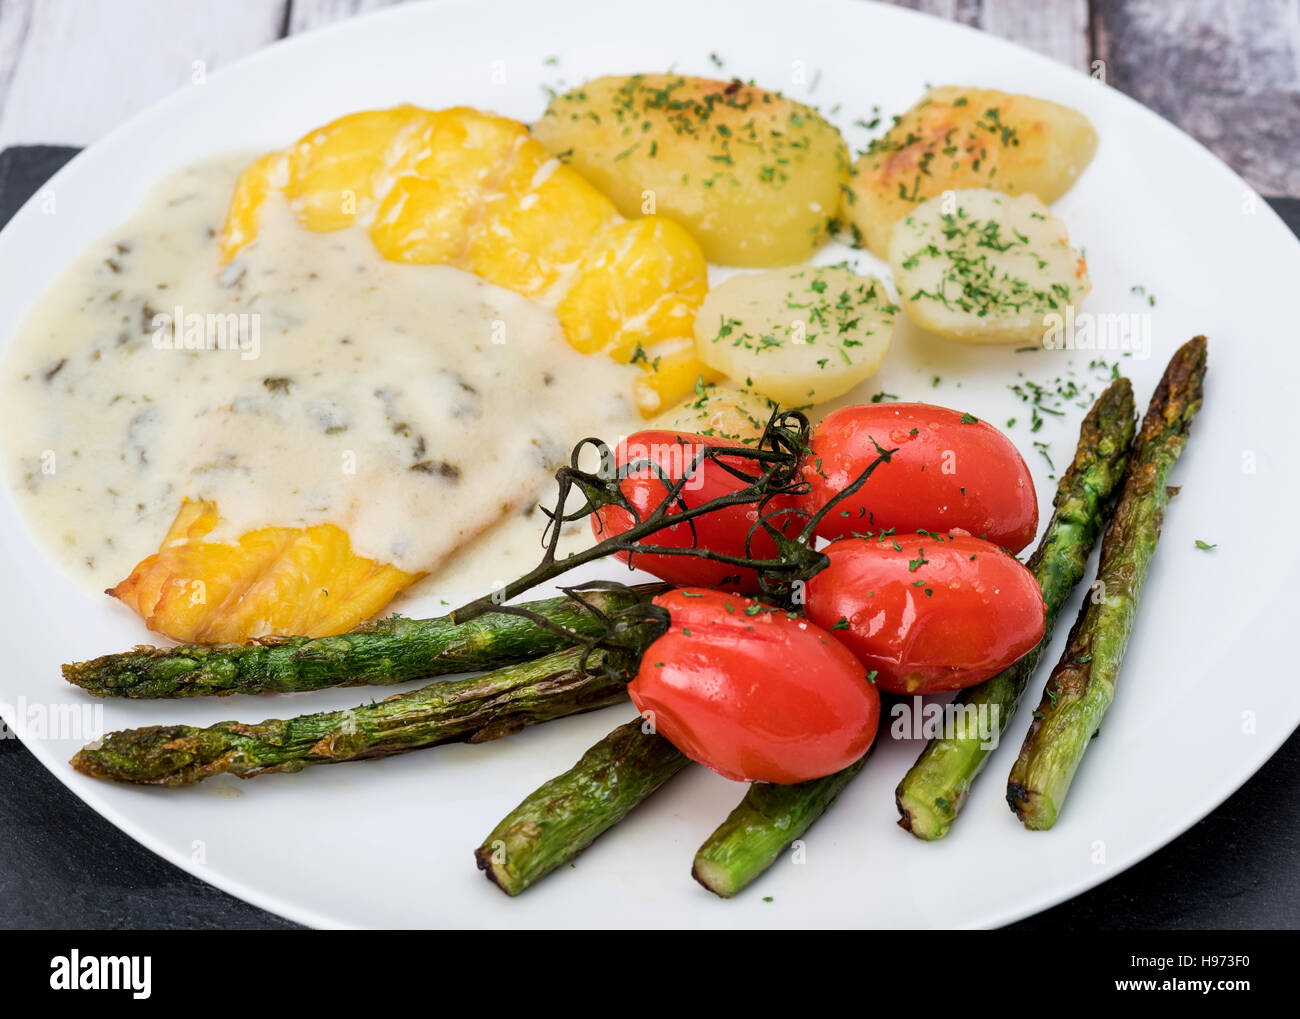 Smoked cod dinner with tartare sauce and vegetables Stock Photo